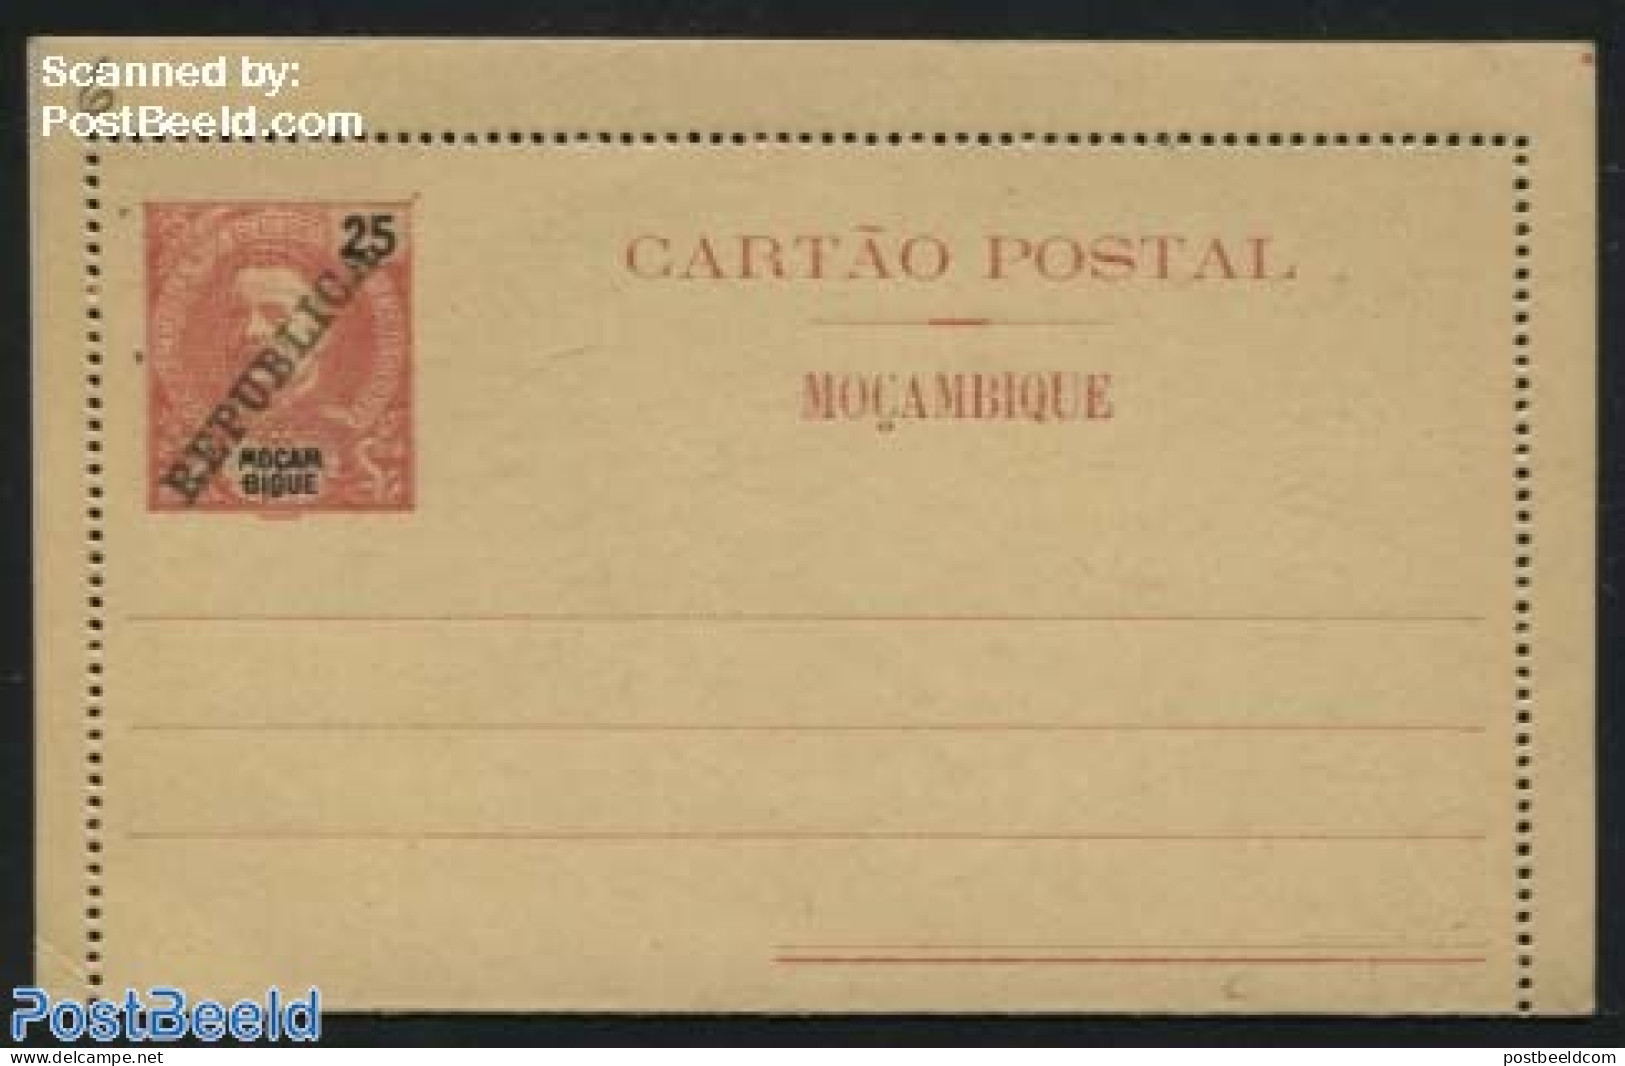 Mozambique 1911 Card Letter 25R, REPUBLICA, Unused Postal Stationary - Mosambik